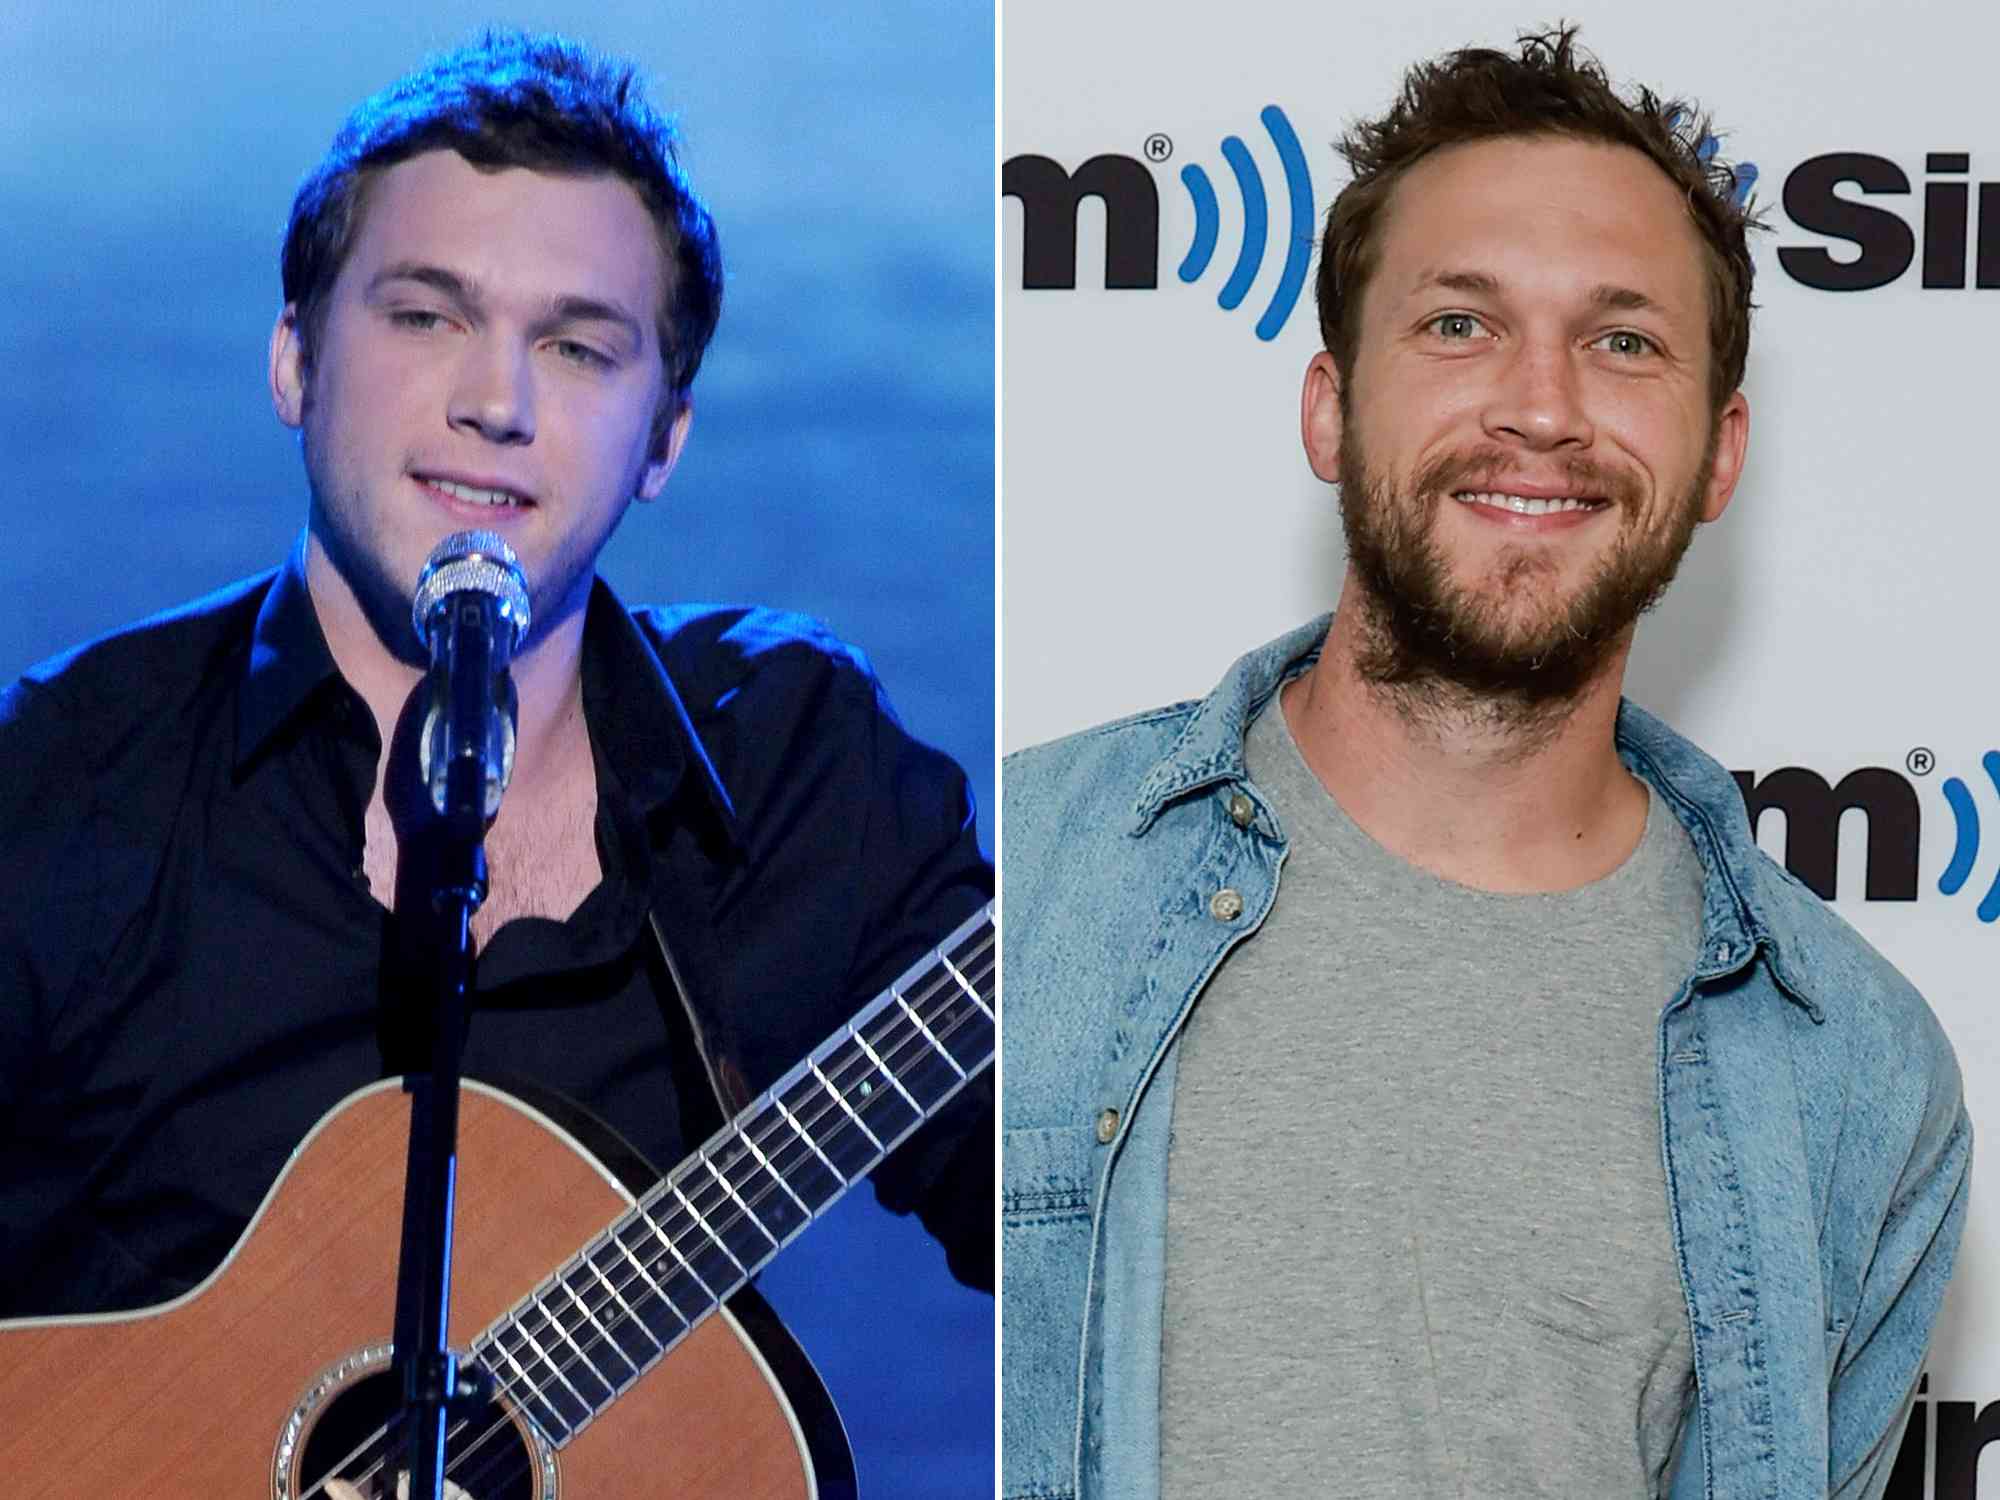 Phillip Phillips performs onstage at FOX's "American Idol"